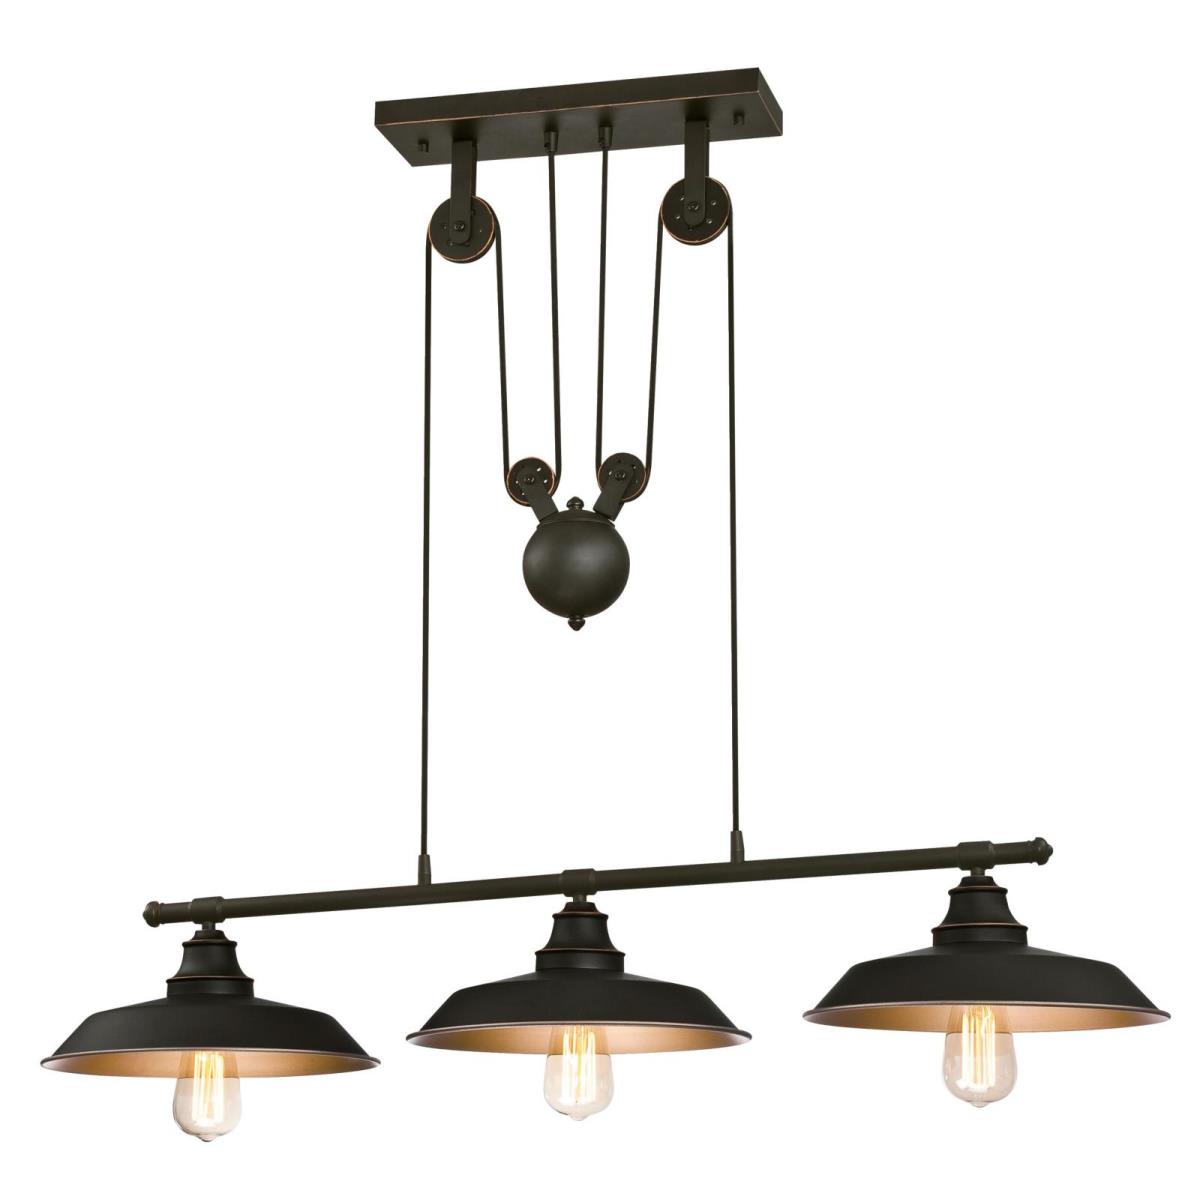 3 Light Island Pulley Pendant Oil Rubbed Bronze Finish with Highlights and Metallic Bronze Interior